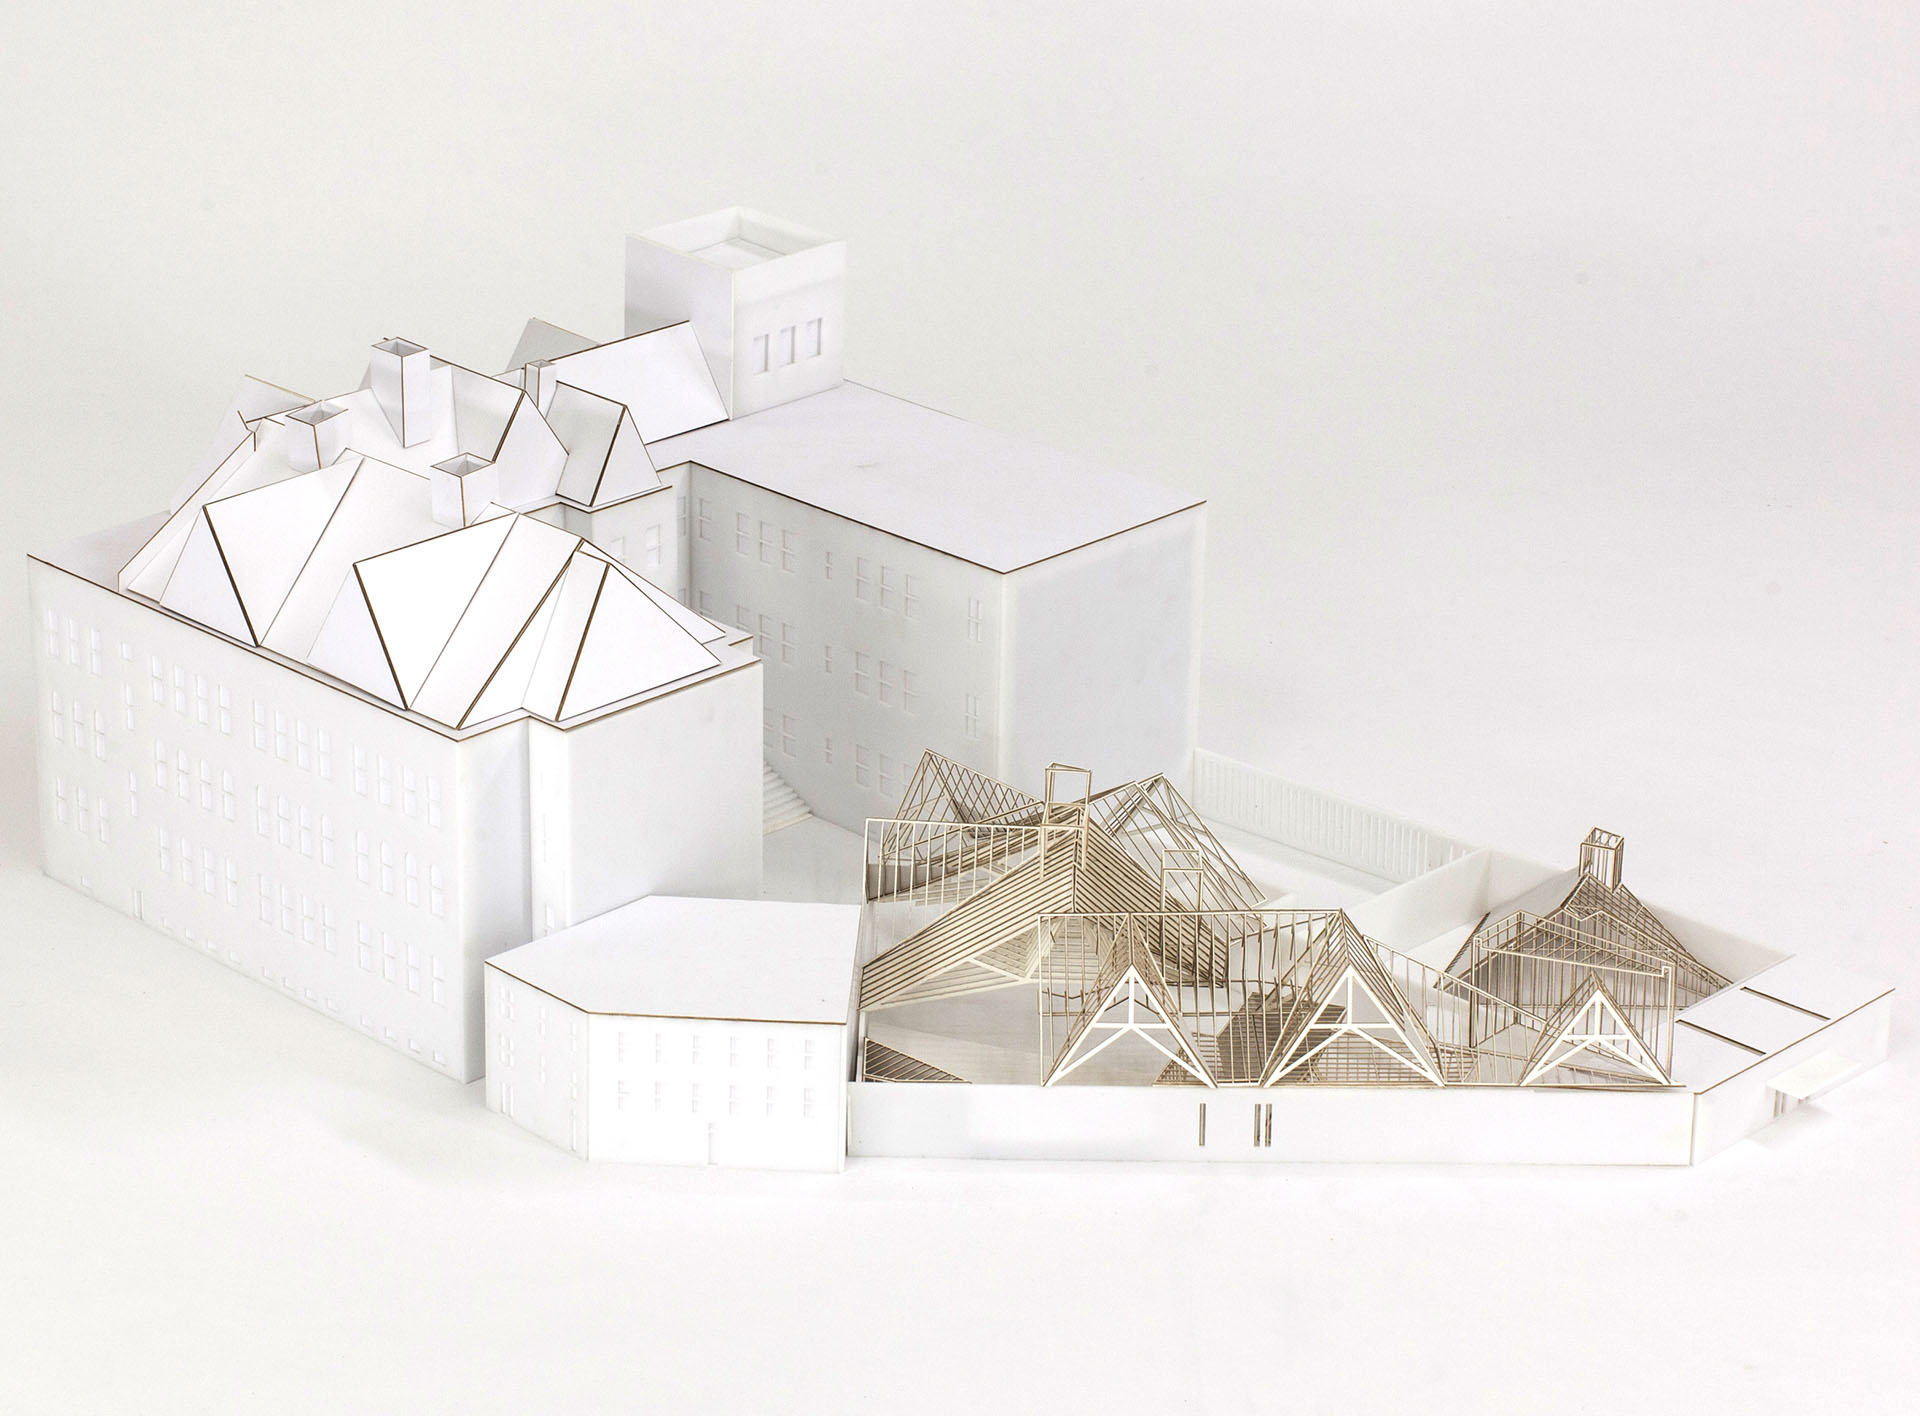 Photograph of an architectural site model of MoMA PS1 Roof Deck proposal